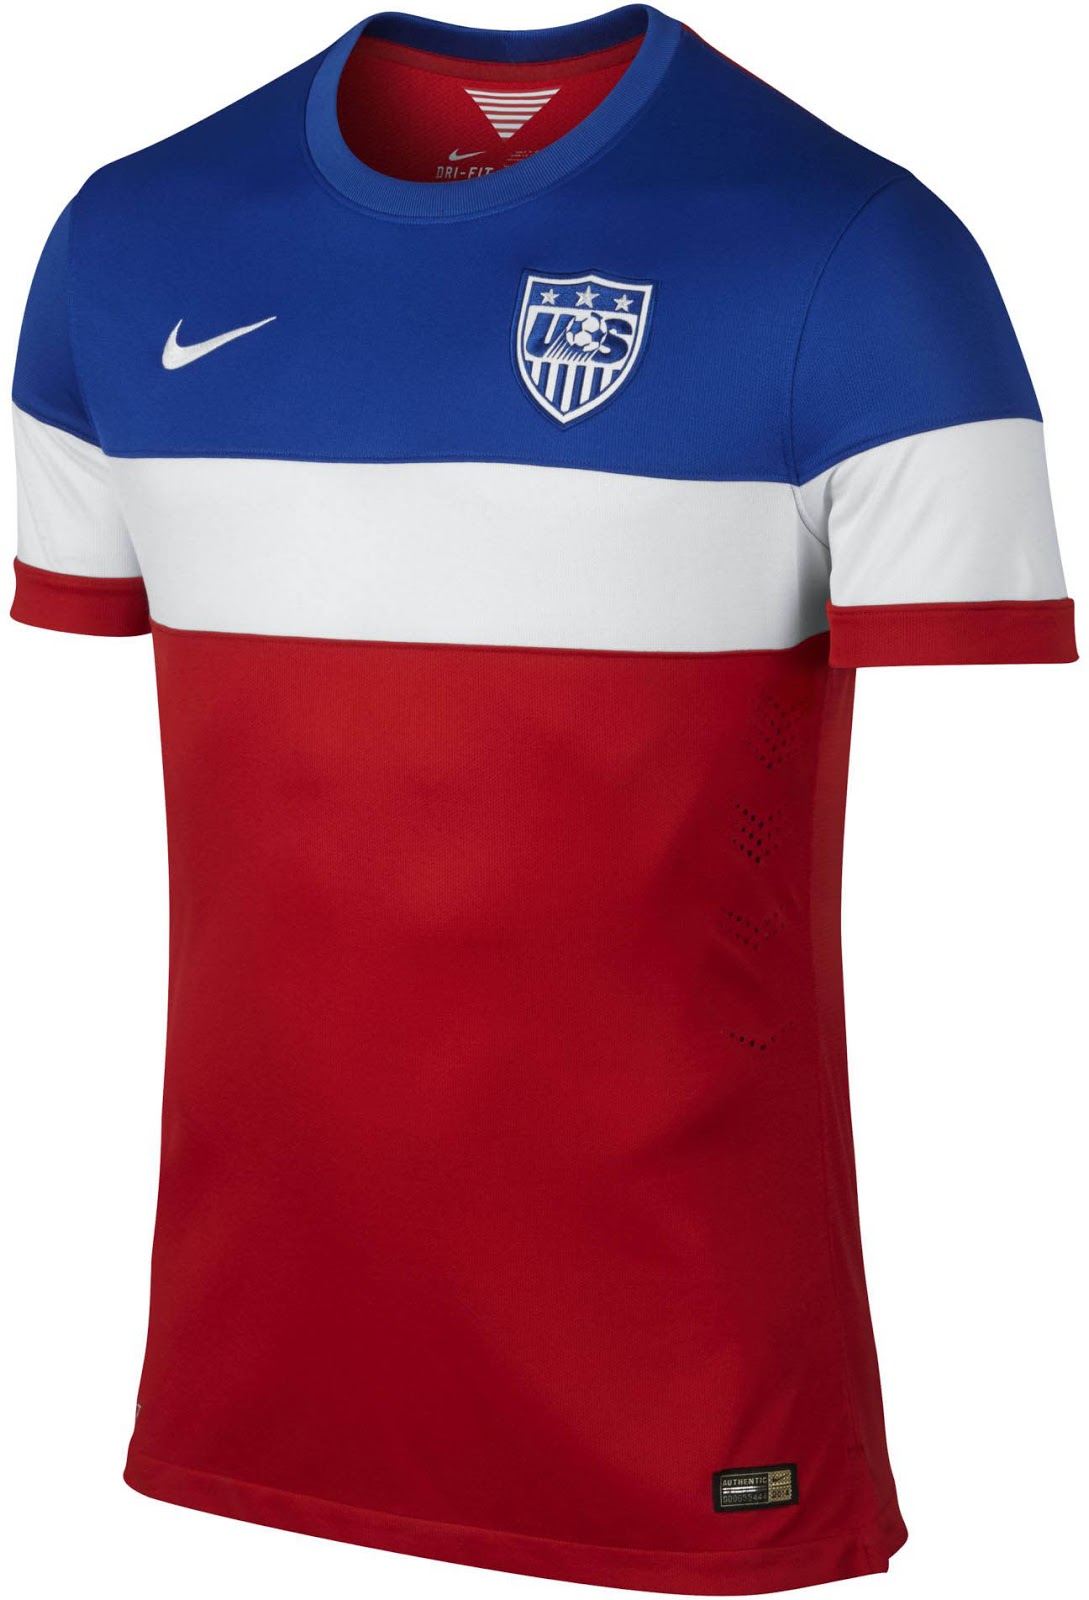 Correspondent Auroch Salie USA 2014 World Cup Home and Away Kits Released - Footy Headlines